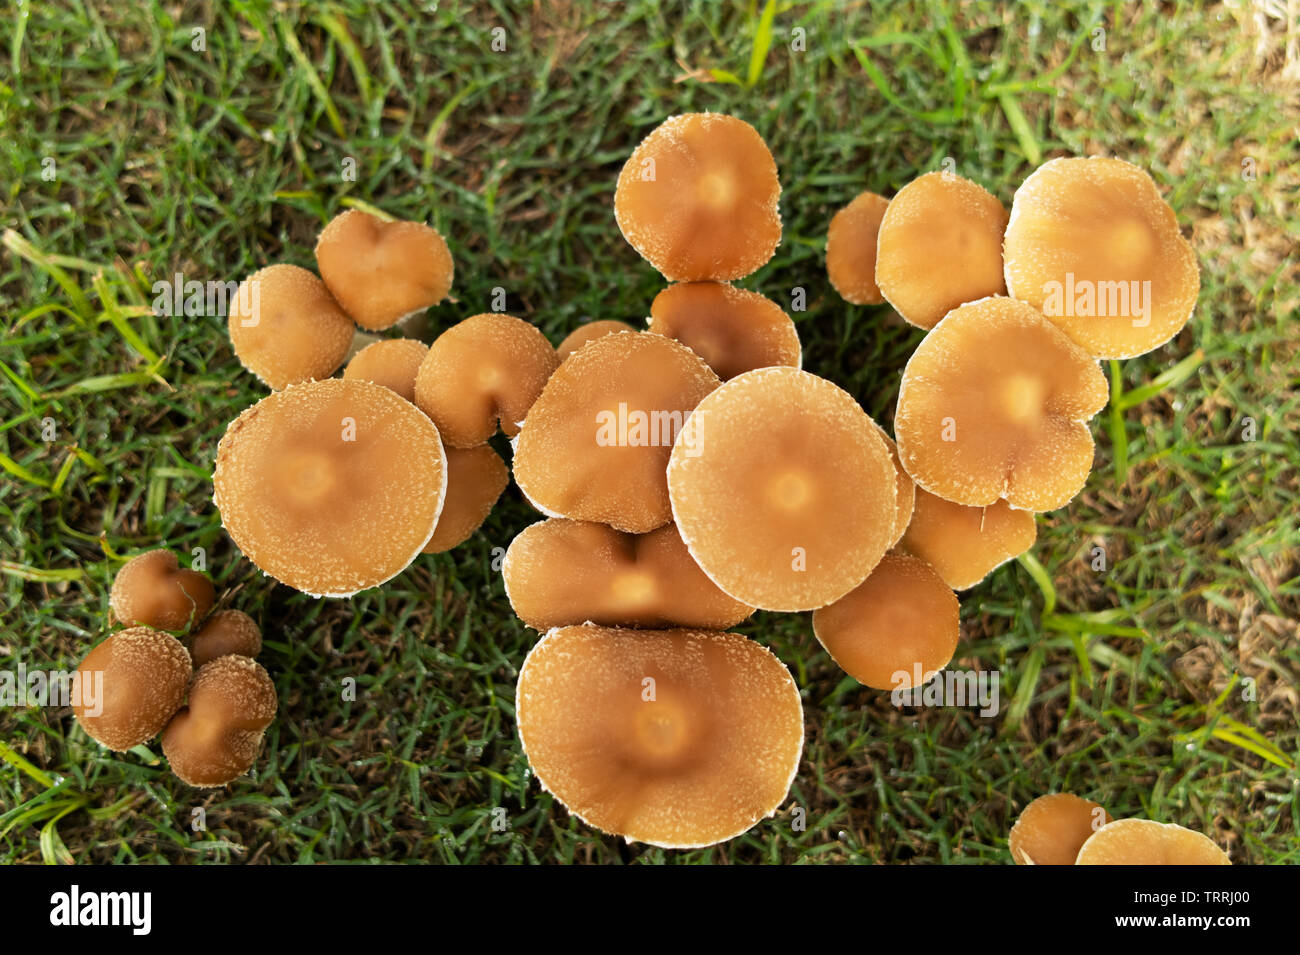 Top view of mushrooms over grass. Stock Photo